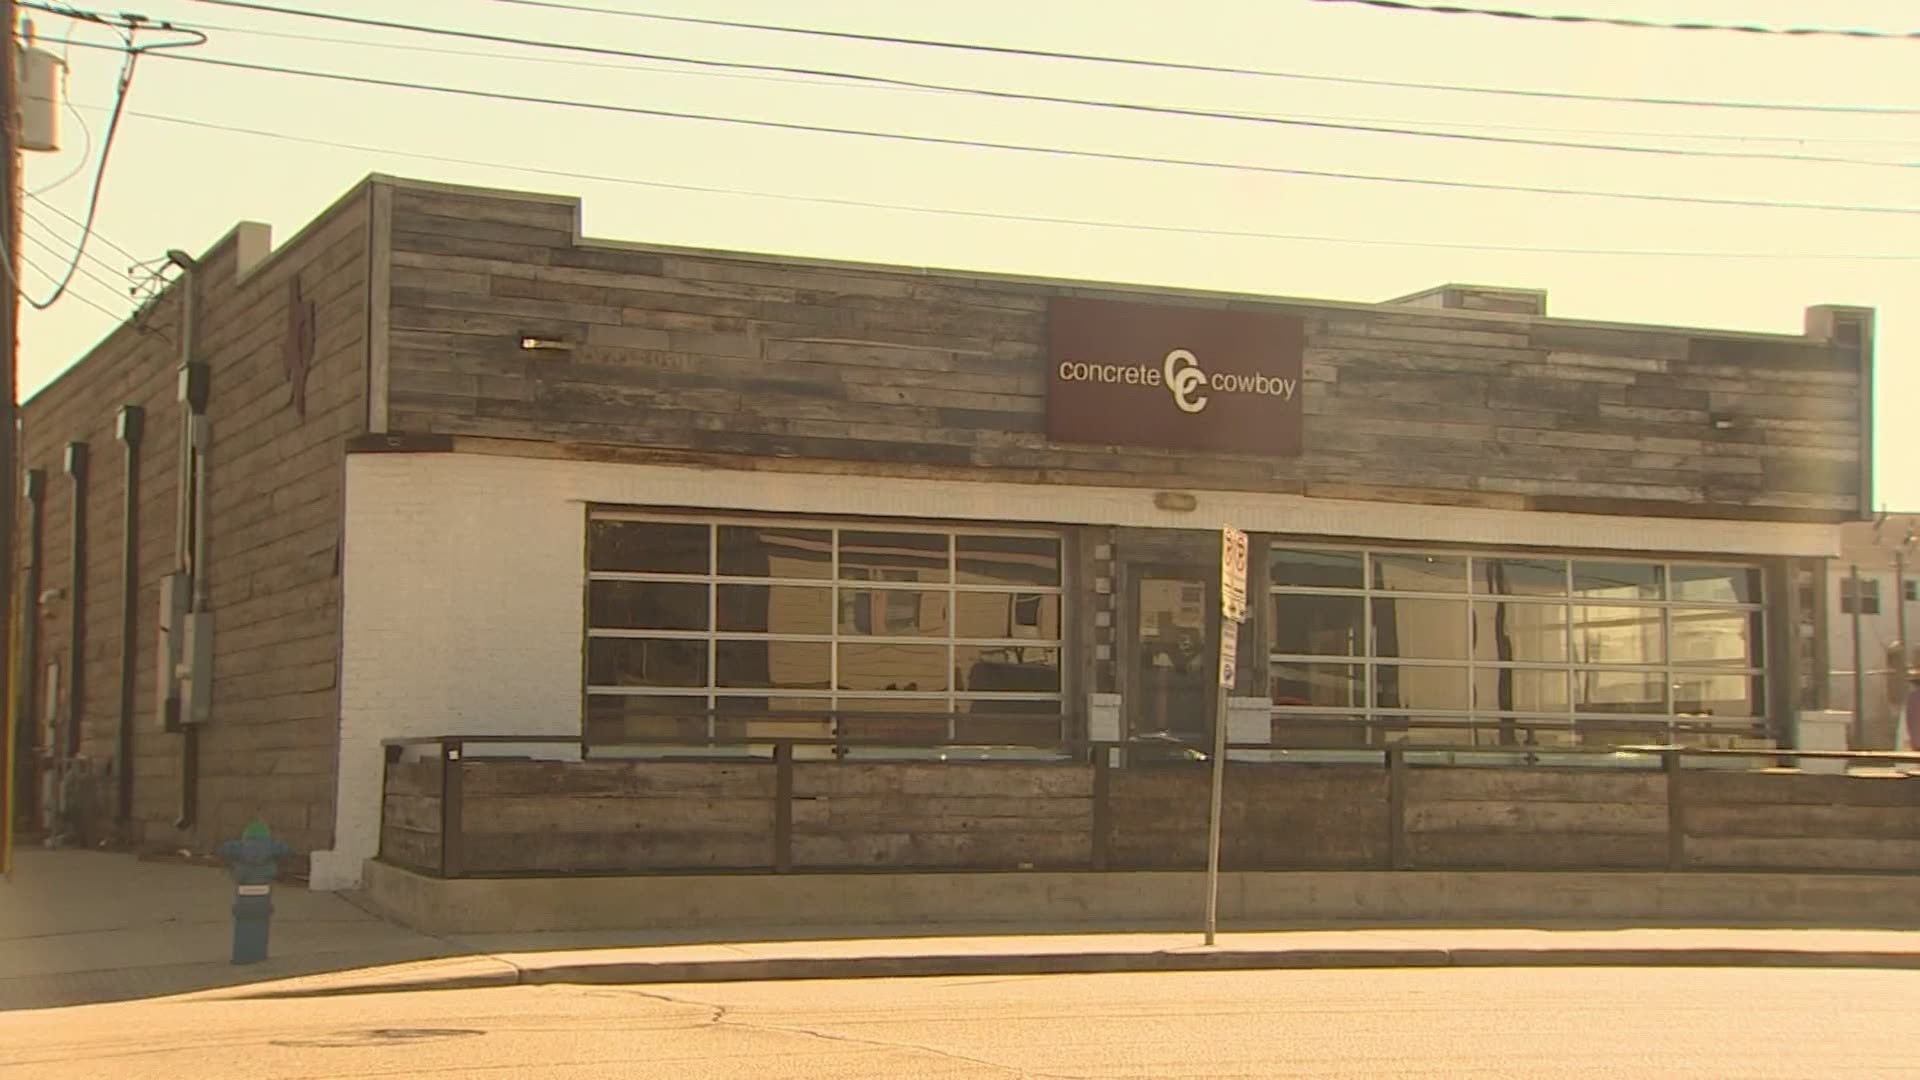 Concrete Cowboy is canceling its "mask off" party, Mayor Turner said. This comes a day after city leaders demanded the owner shut it down to prevent COVID spread.